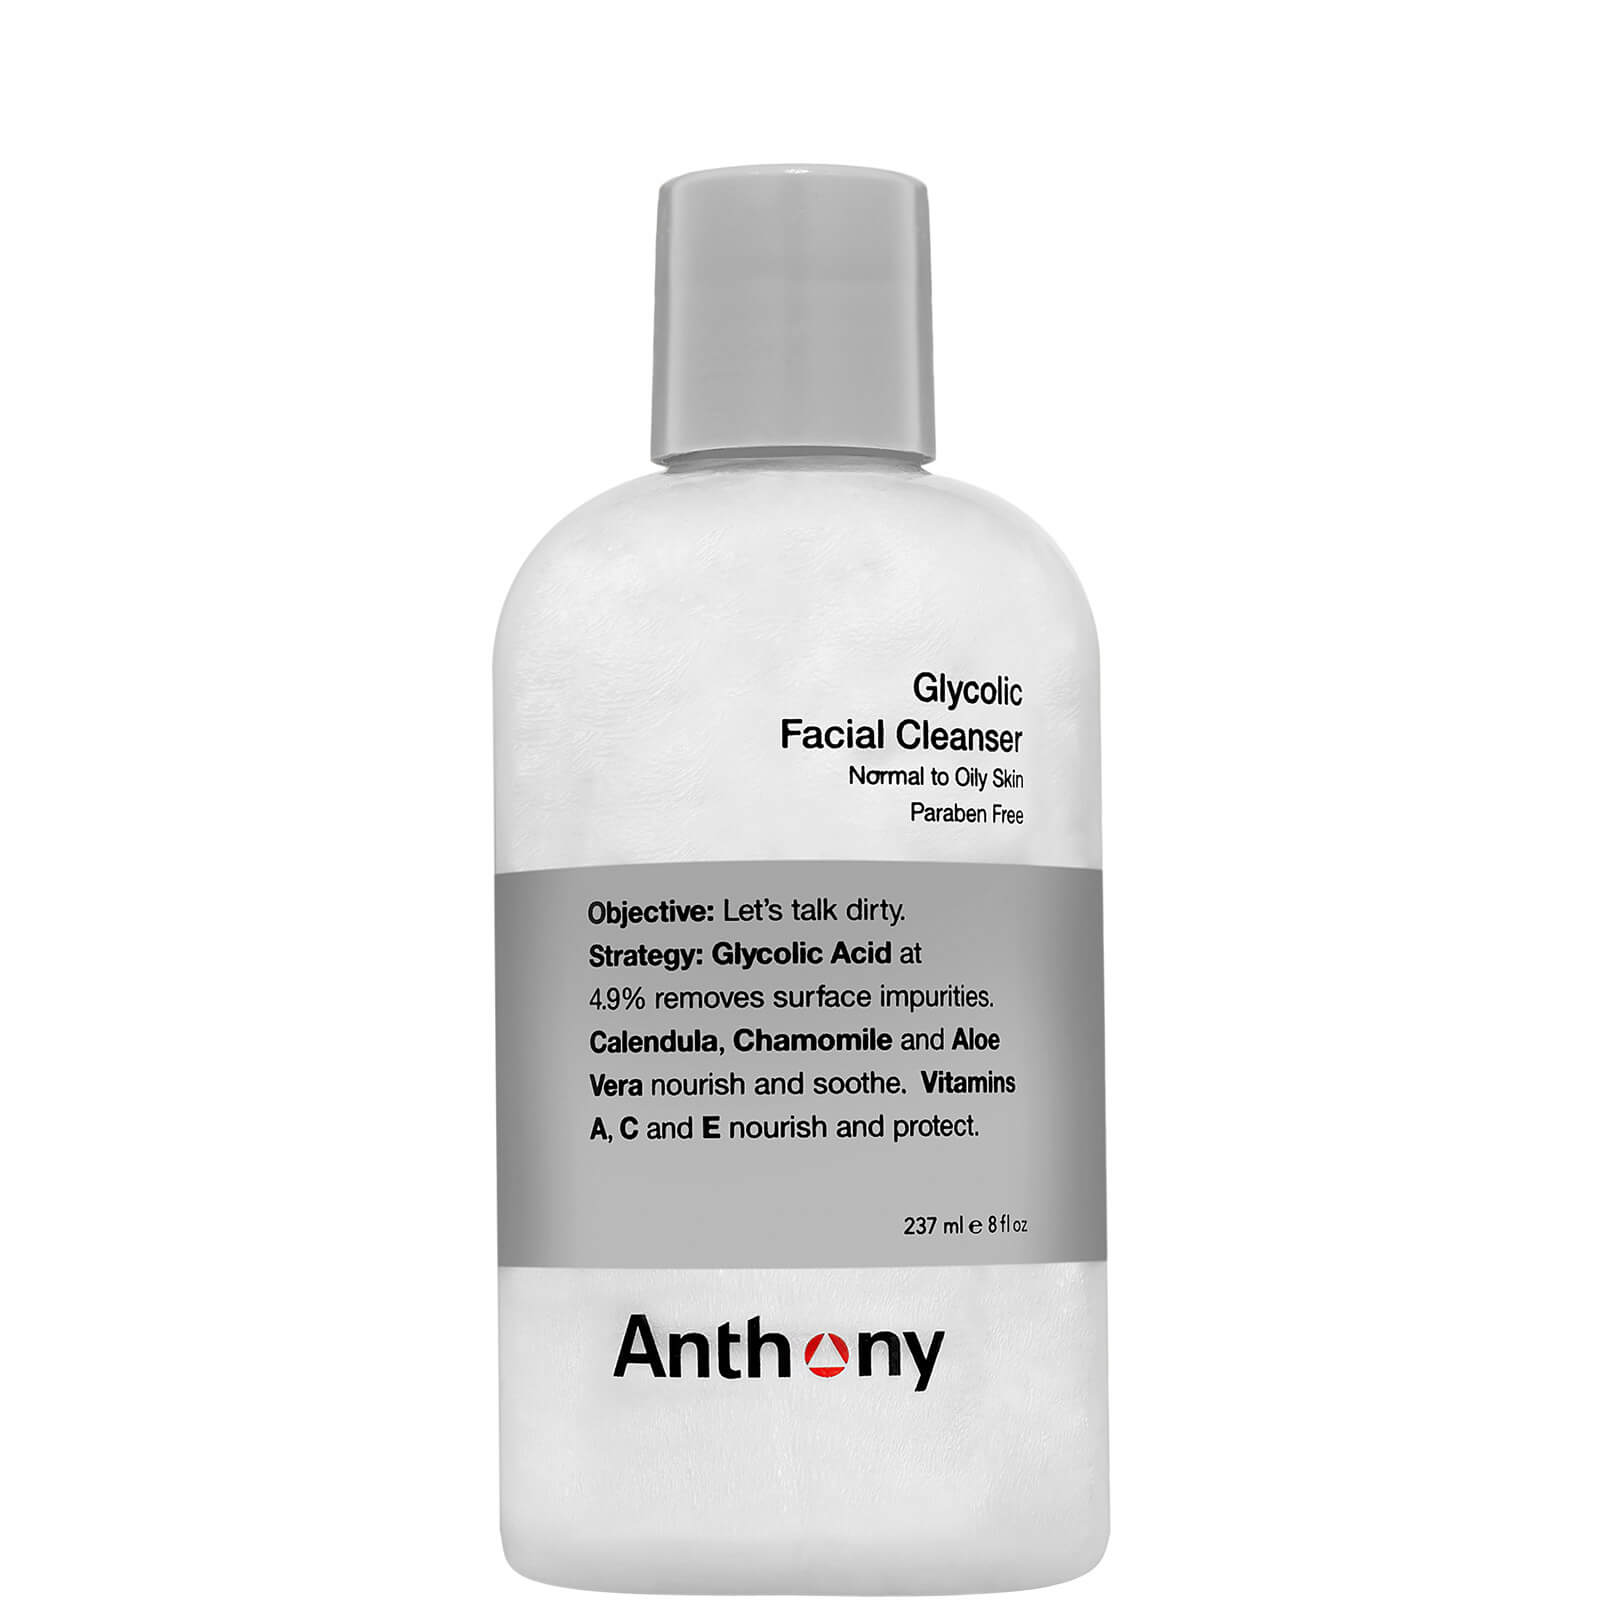 Photos - Facial / Body Cleansing Product Anthony Glycolic Facial Cleanser 237ml 906-01003-R 